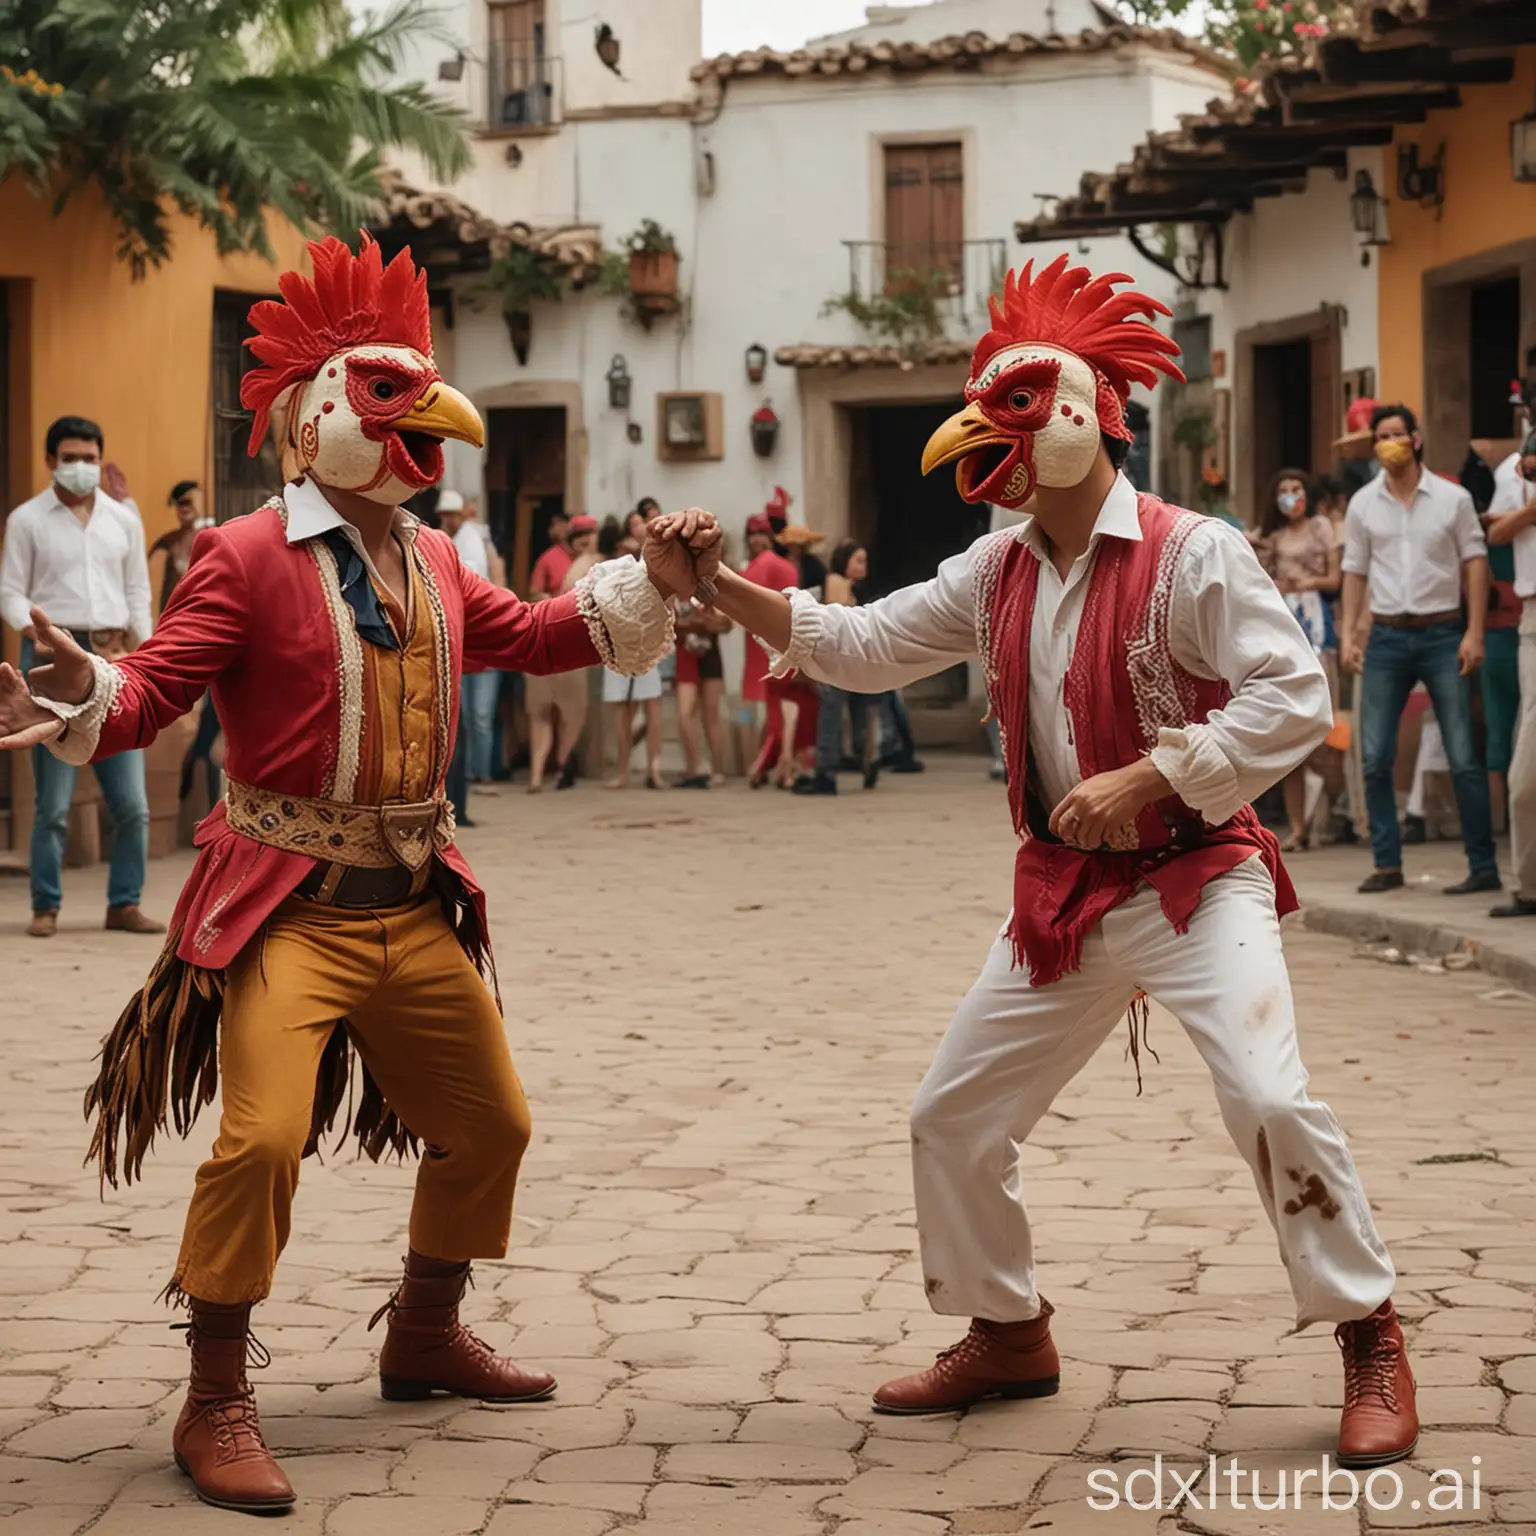 Passionate-Actors-in-MexicanStyle-Cockfighting-Plaza-with-Rooster-Masks